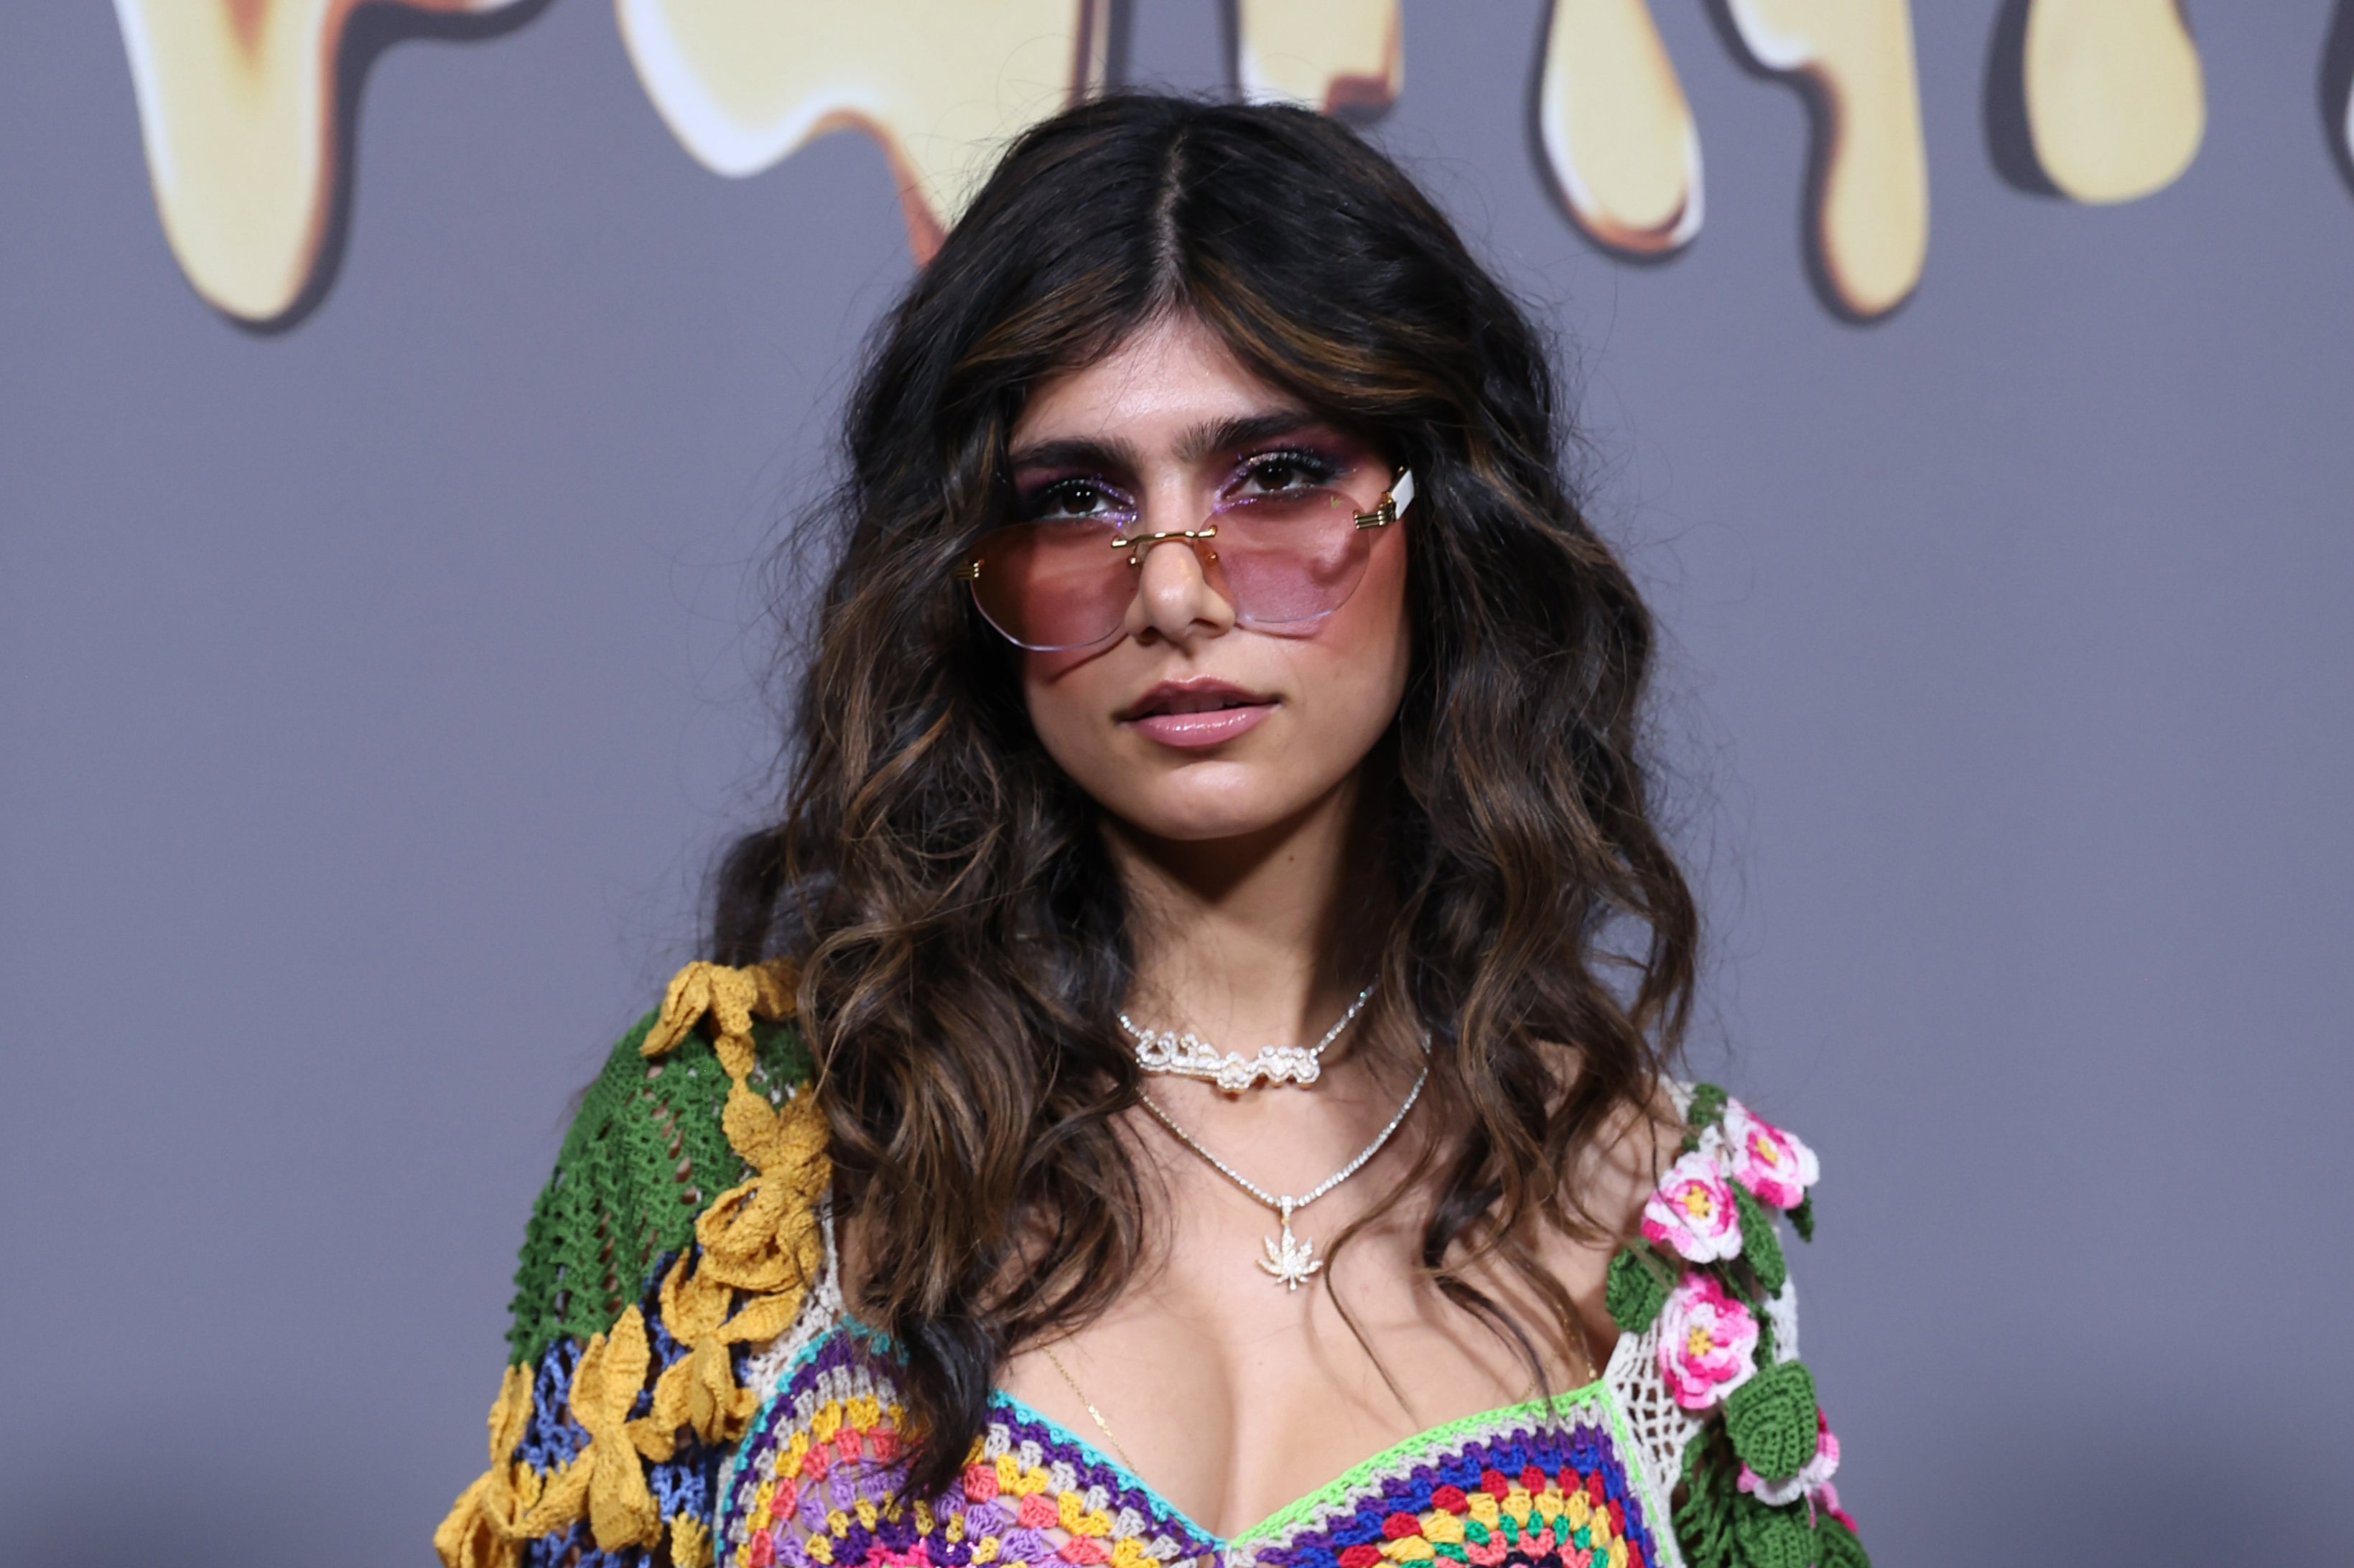 Mia Khalifa Top Sex Xxx Xxnx - Mia Khalifa dropped from Playboy podcasting deal after Israel-Palestine  comments | The Independent